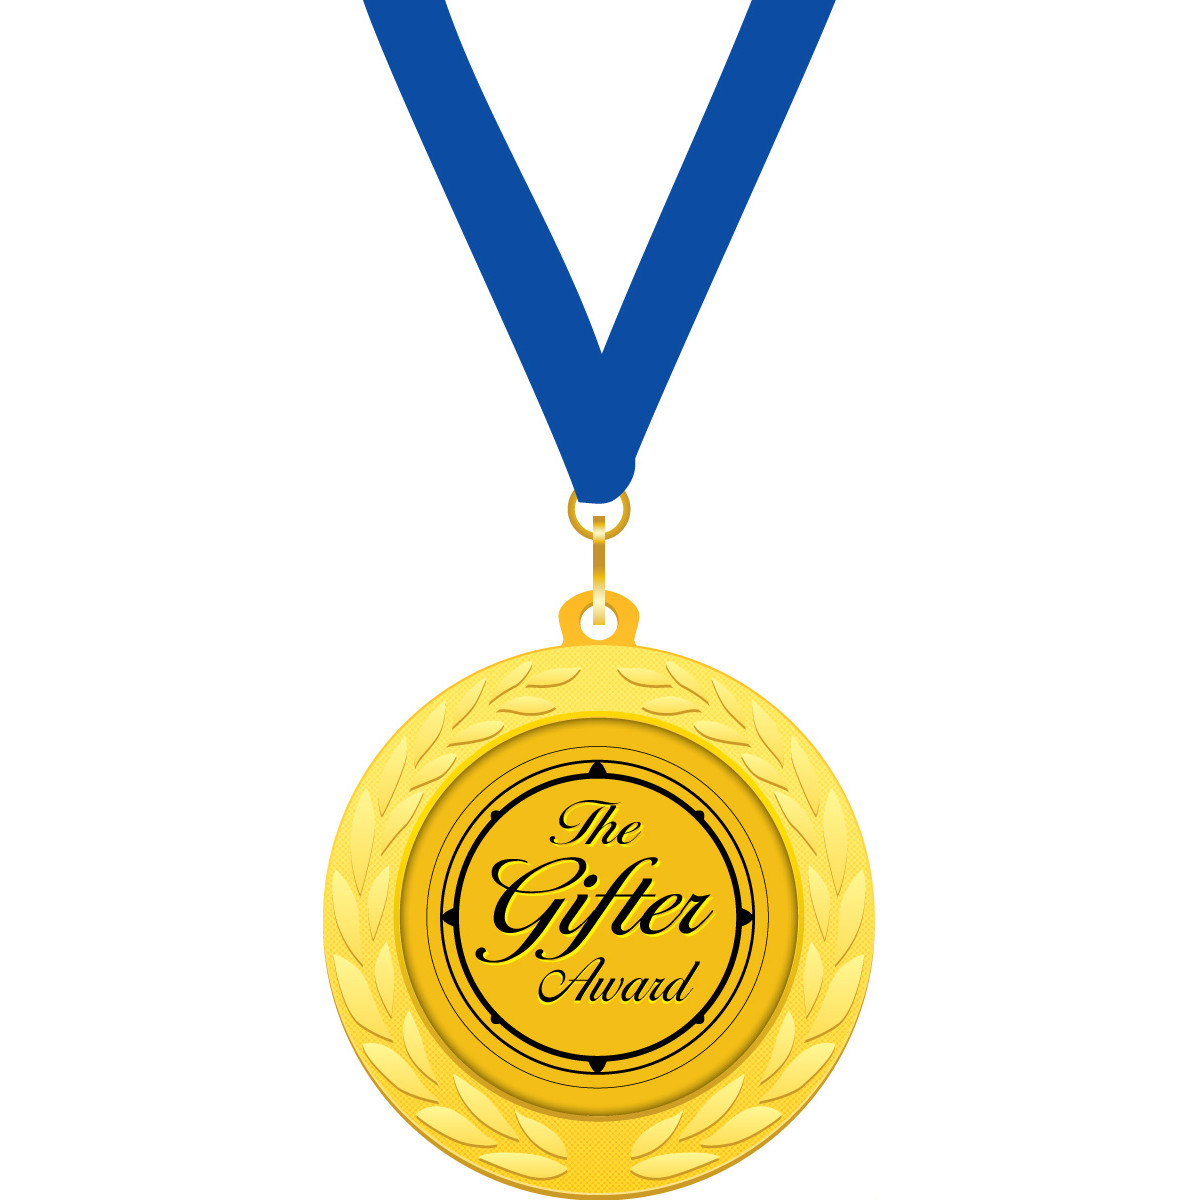 Custom 2 in. Gold Medallion with Blue Neck Ribbon (The Gifter Award)